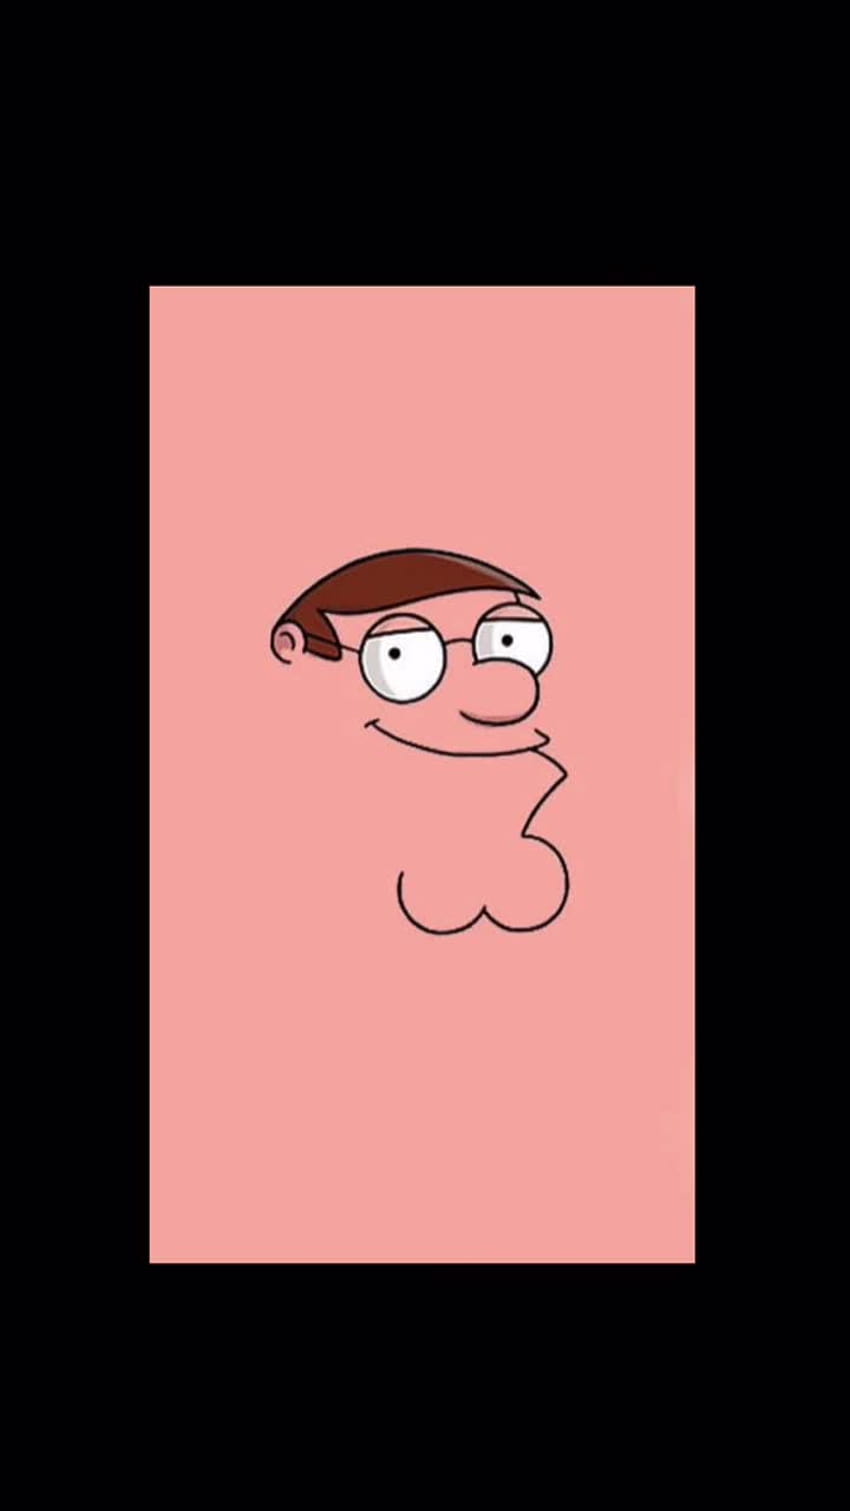 Discover live family guy 's popular videos, family guy iphone HD phone wallpaper